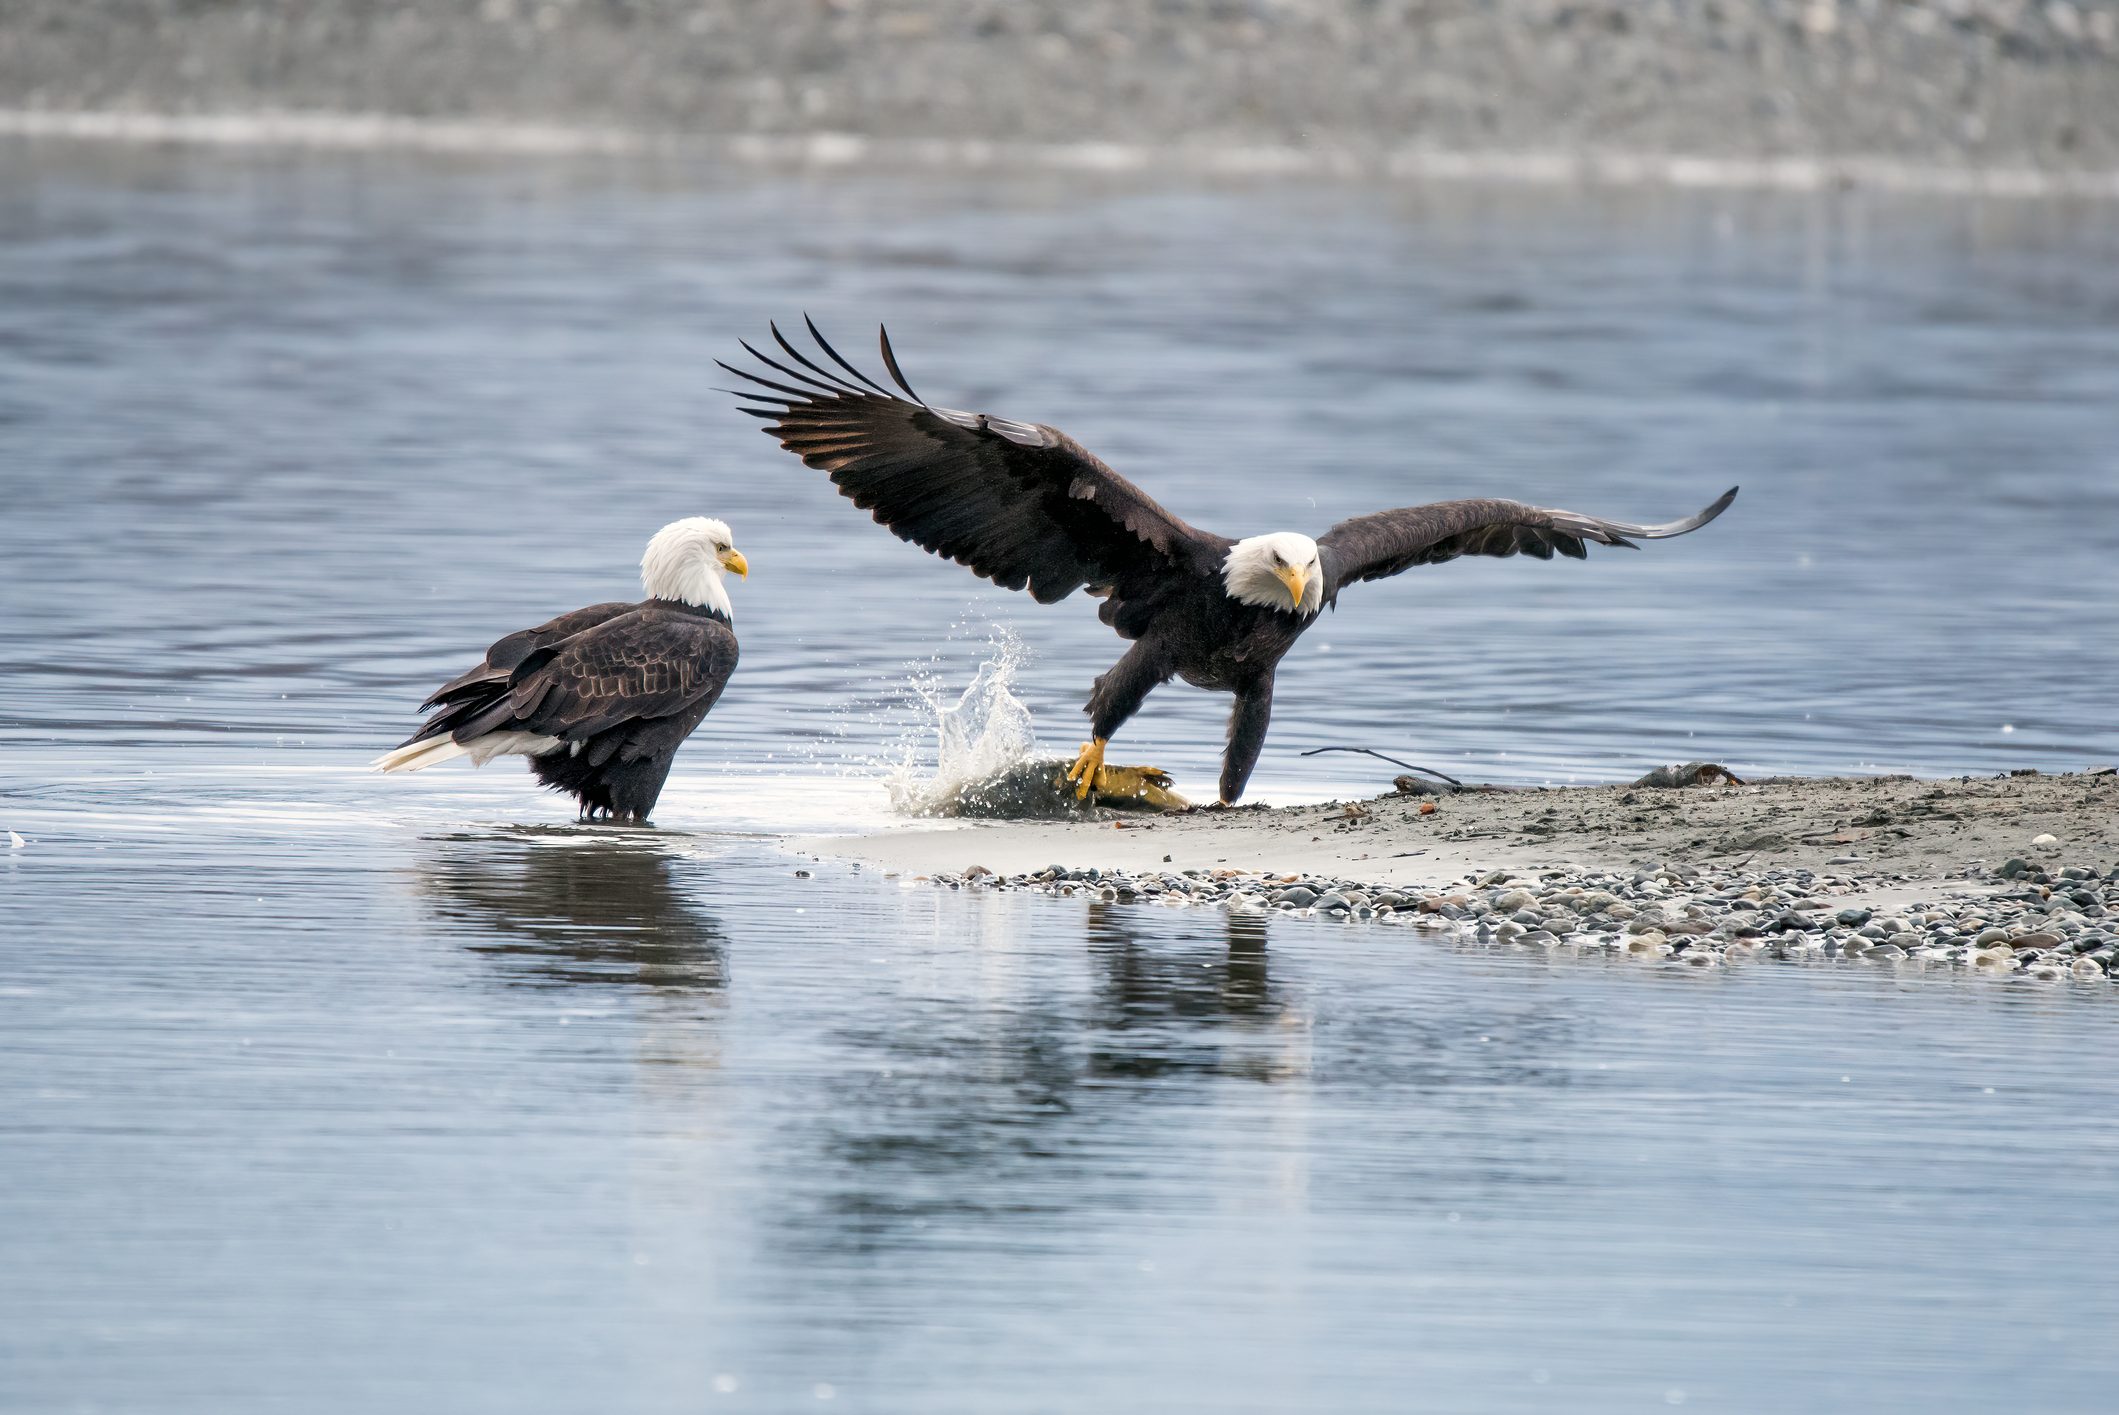 <p>The Alaska <a href="https://www.tripadvisor.com/Attraction_Review-g31005-d247668-Reviews-Chilkat_Bald_Eagle_Preserve-Haines_Alaska.html" rel="noopener">Chilkat Bald Eagle Preserve</a> is a state park and wildlife refuge in Haines, and the Chilkat Valley, in particular, is home to 200 to 400 eagles. There is a free roadside pull-off at 19-mile Haines Highway with a short trail. In the summer, however, rafting and jet boat tours are available. Thinking of visiting? Learn the <a href="https://www.rd.com/article/when-to-buy-plane-tickets/" rel="noopener">best time to book a flight</a> for some serious savings.</p> <p class="listicle-page__cta-button-shop"><a class="shop-btn" href="https://www.tripadvisor.com/Attraction_Review-g31005-d247668-Reviews-Chilkat_Bald_Eagle_Preserve-Haines_Alaska.html">Learn More</a></p>